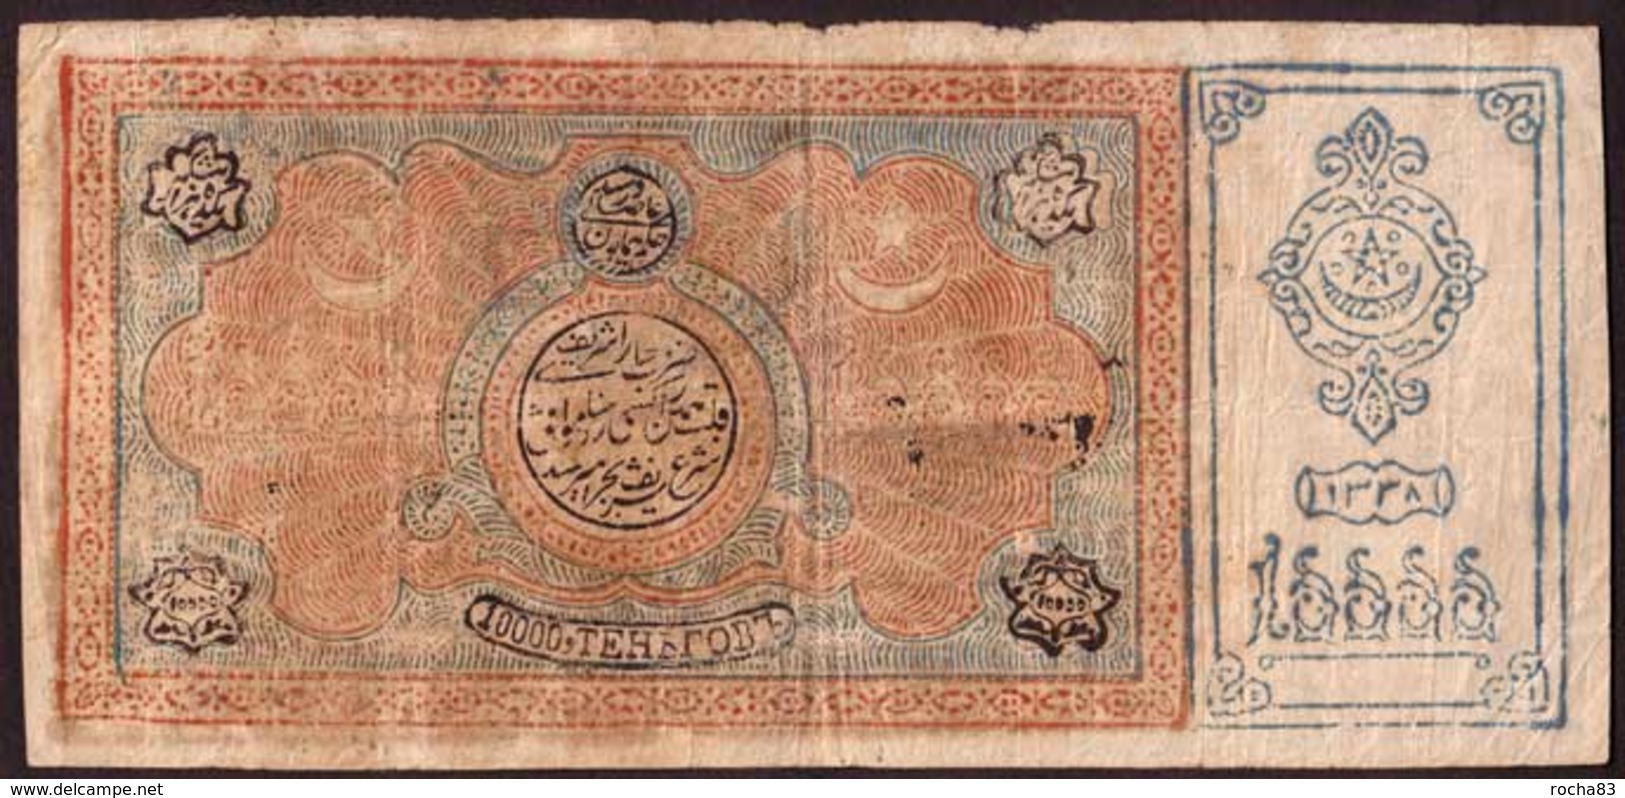 RUSSIE  ASIE CENTRALE - 10.000 Tengas 1338 (1919) - Pick S1024 Emirate BUKHARA - Russia